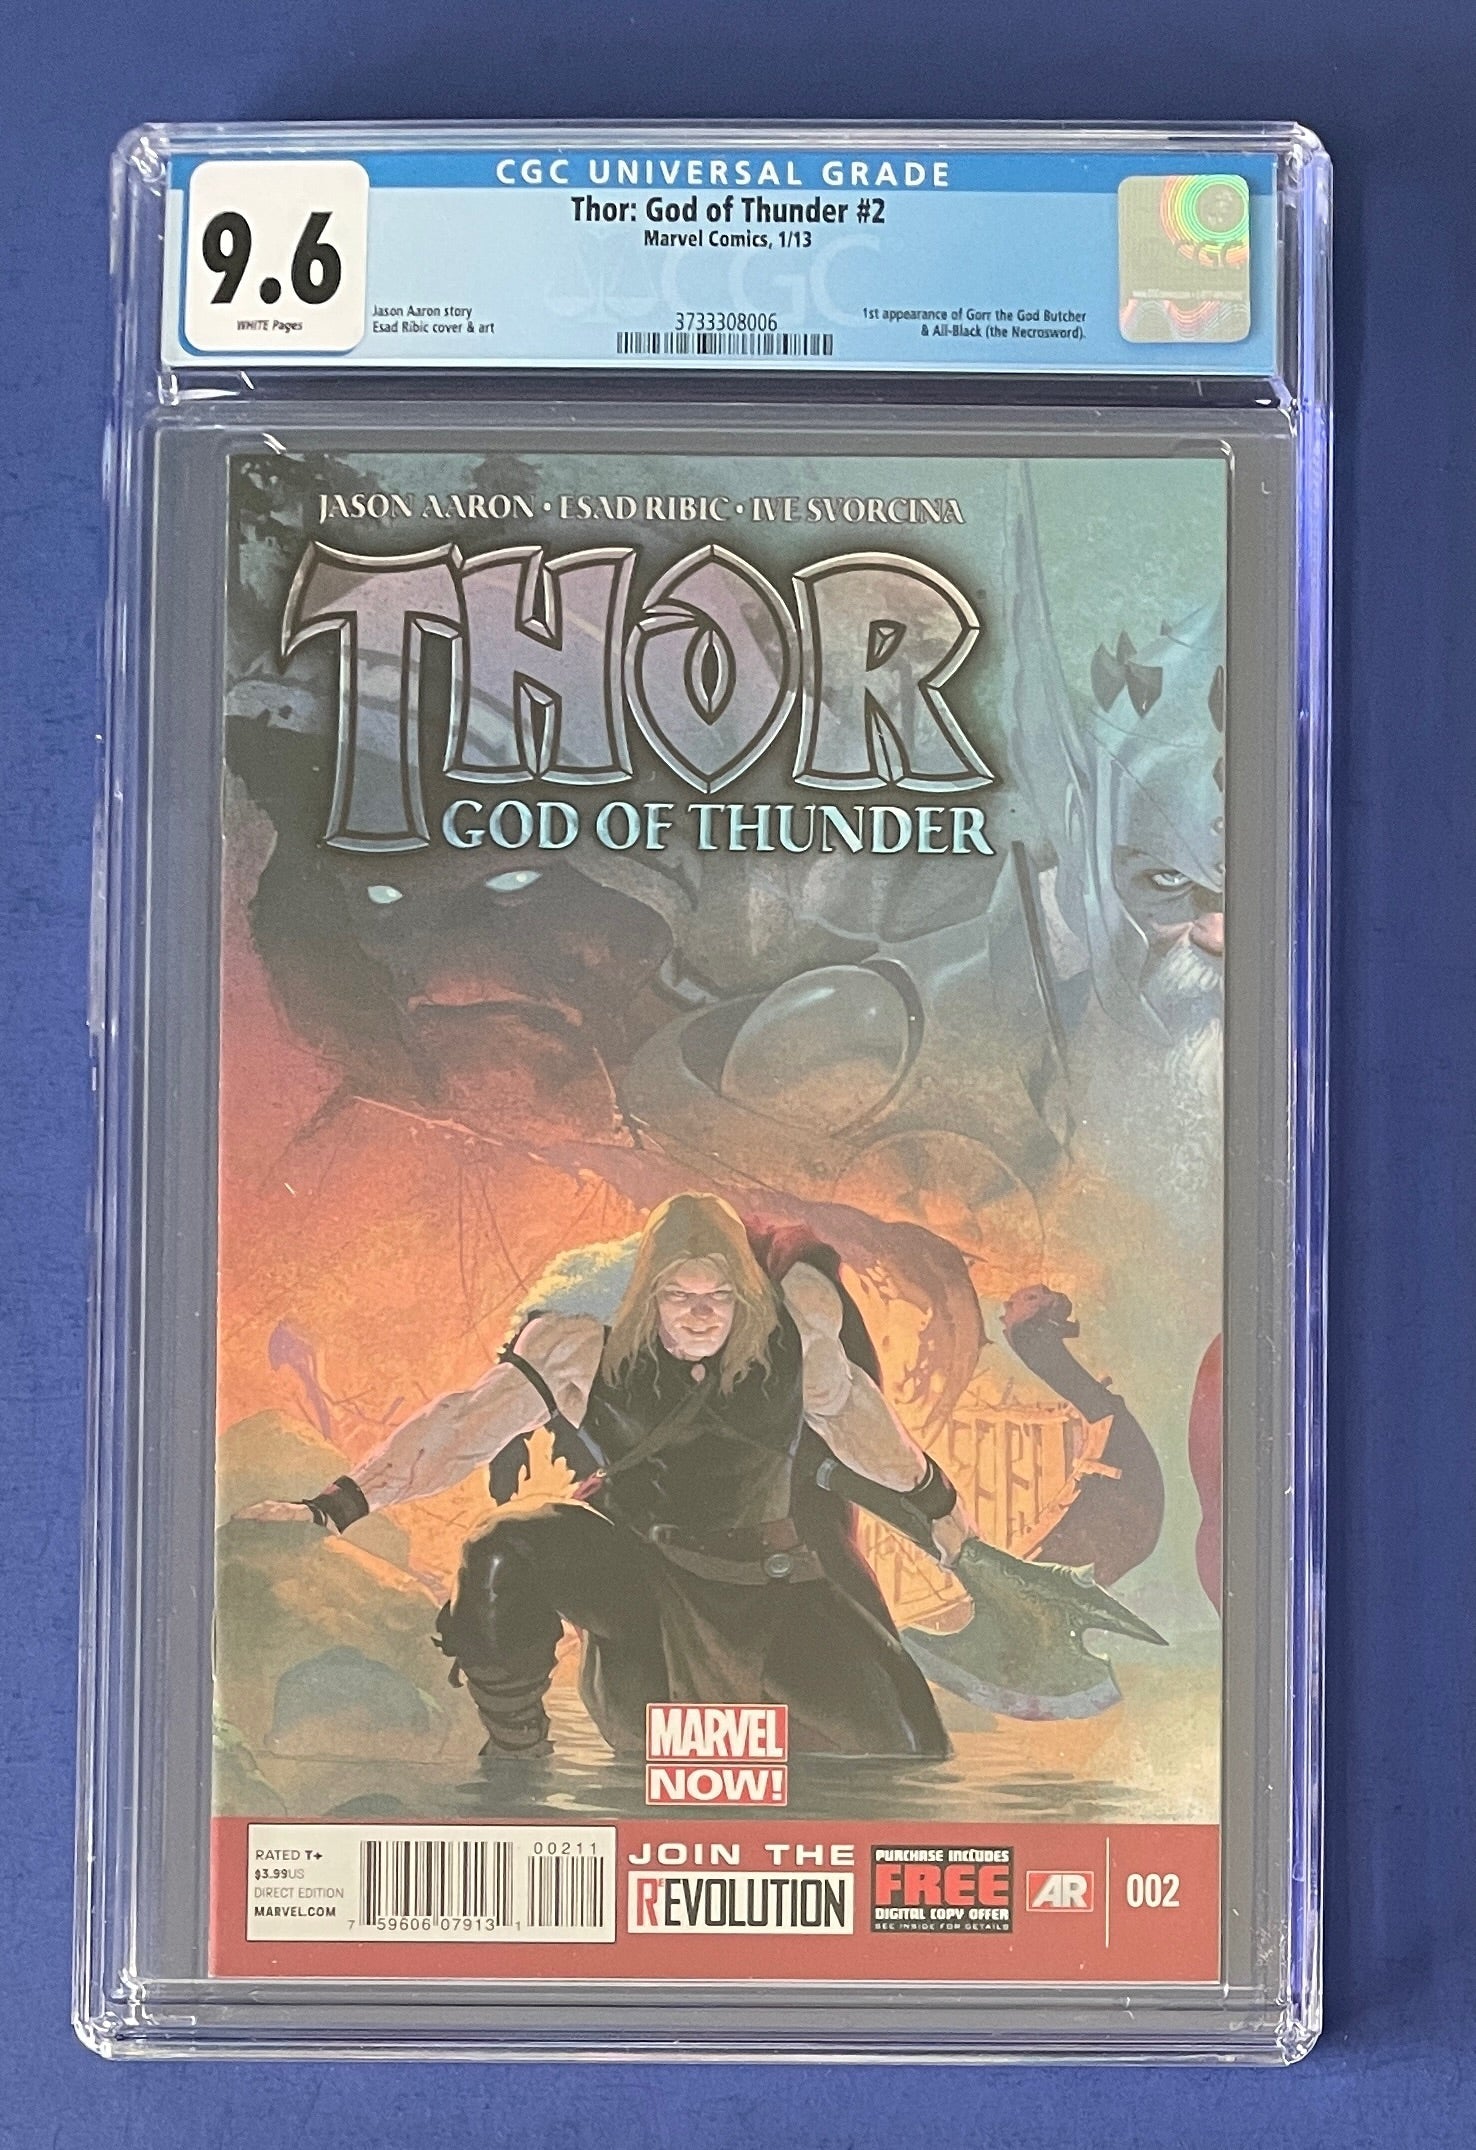 THOR: GOD OF THUNDER #2 CGC 9.6 WP 1ST APPEARANCE OF GORR AND NECROSWORD